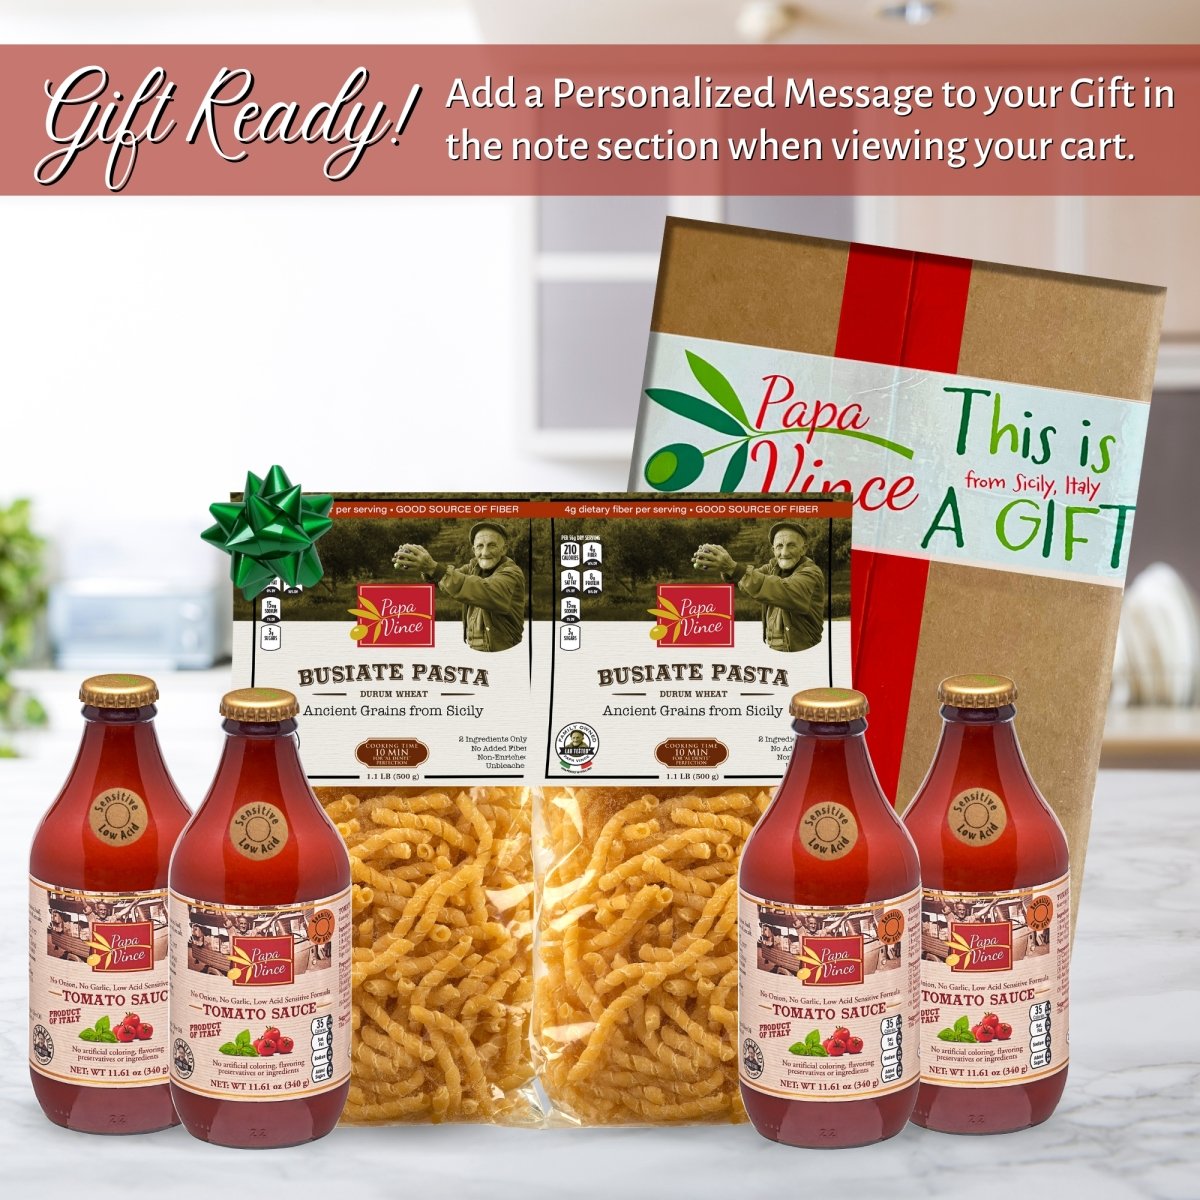 Gourmet Gift Clean Food Basket from Sicily - Farm Fresh from Artisans in Italy, Busiate Homemade Pasta & Cherry Tomato Sauce | Papa Vince - Papa Vince